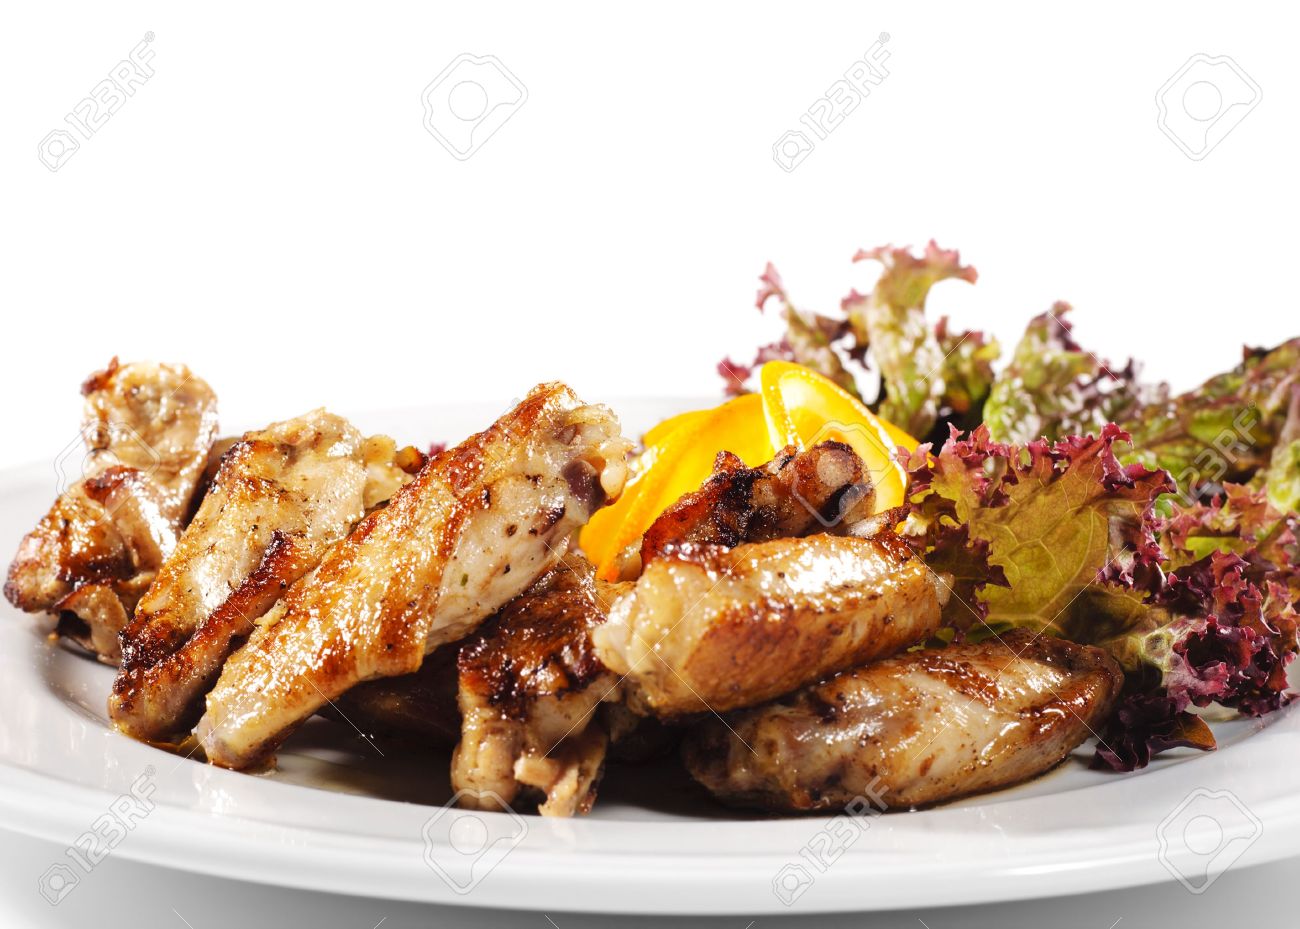 5123204-Hot-Meat-Dishes-Fried-Chicken-Wings-with-Orange-Slice-and-Vegetable-Leaf-Stock-Photo